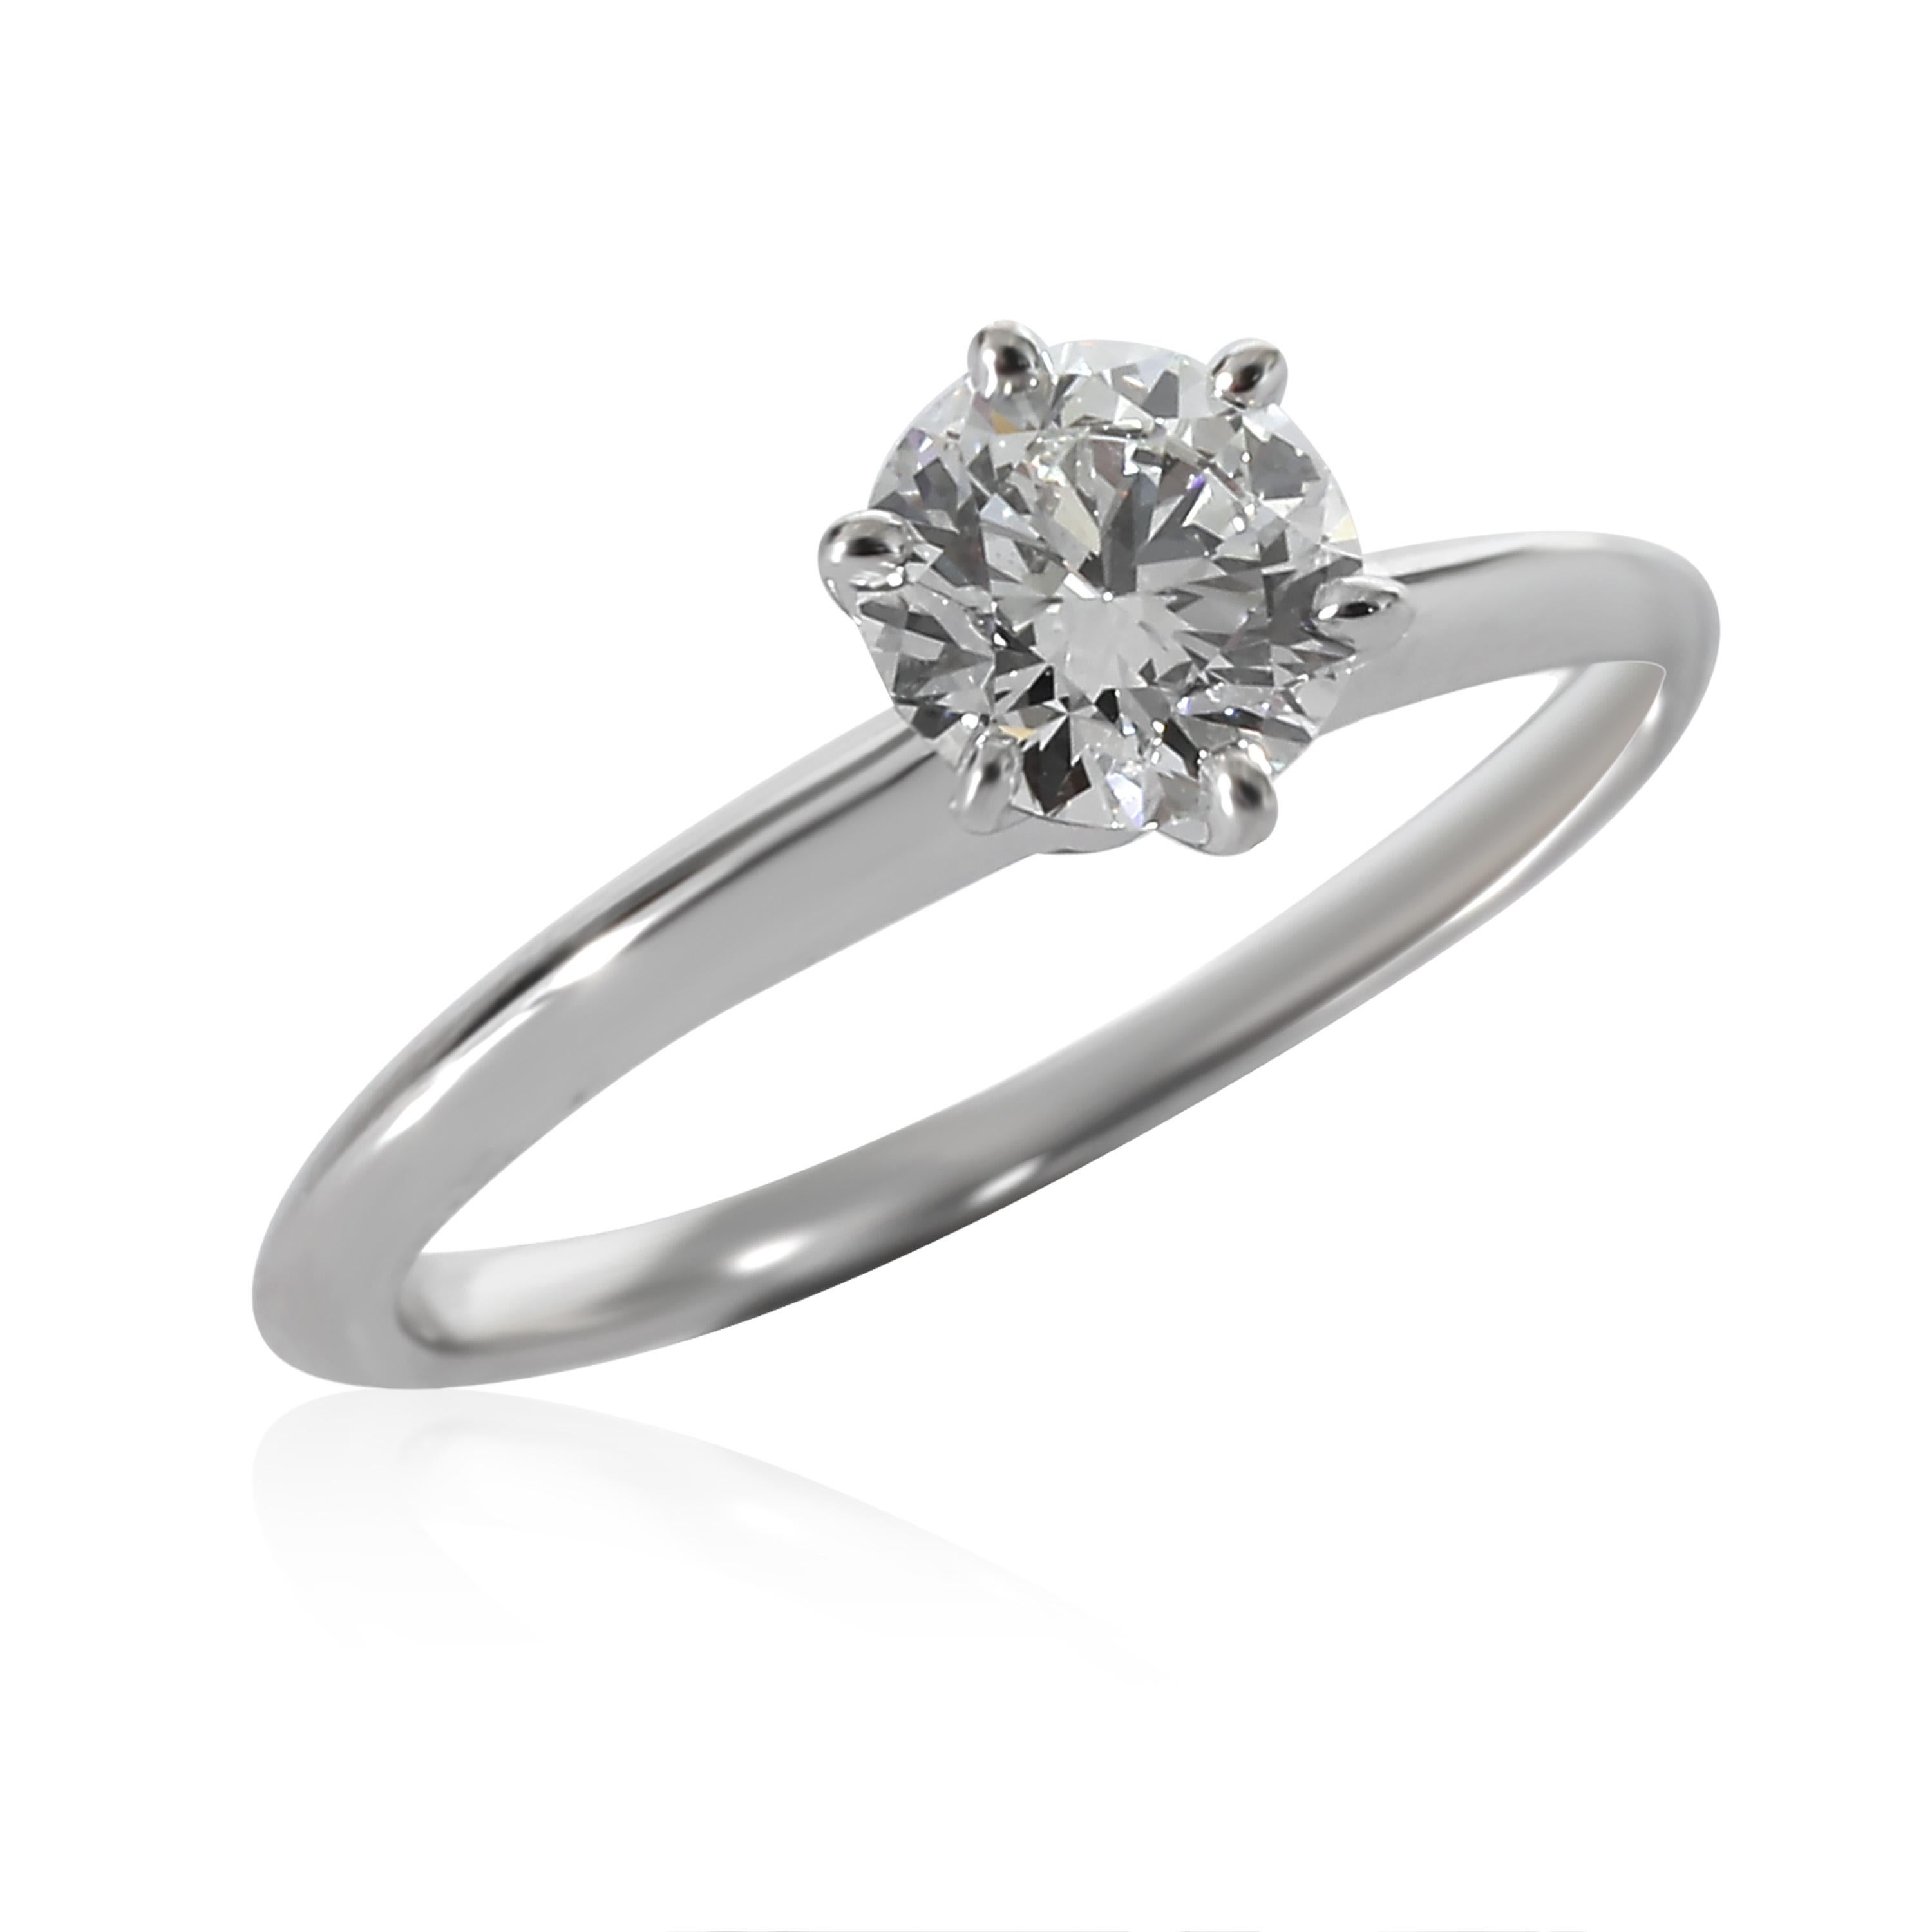 Tiffany & Co. Solitaire Diamond Engagement Ring in Platinum G VVS2 0.9 CTW

PRIMARY DETAILS
SKU: 135819
Listing Title: Tiffany & Co. Solitaire Diamond Engagement Ring in Platinum G VVS2 0.9 CTW
Condition Description: The classic engagement ring.